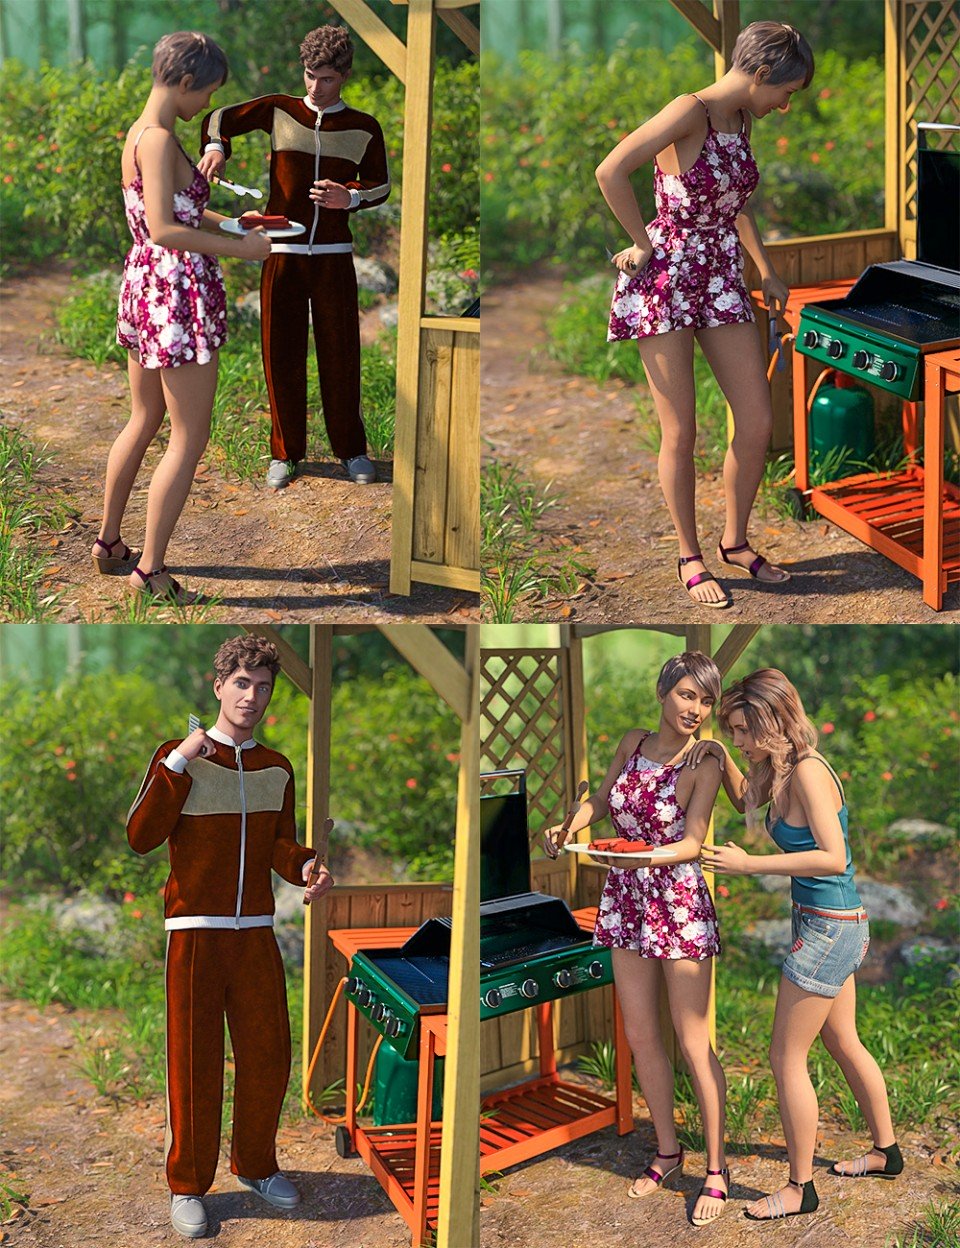 Barbeque Props & Poses for Genesis 8_DAZ3D下载站